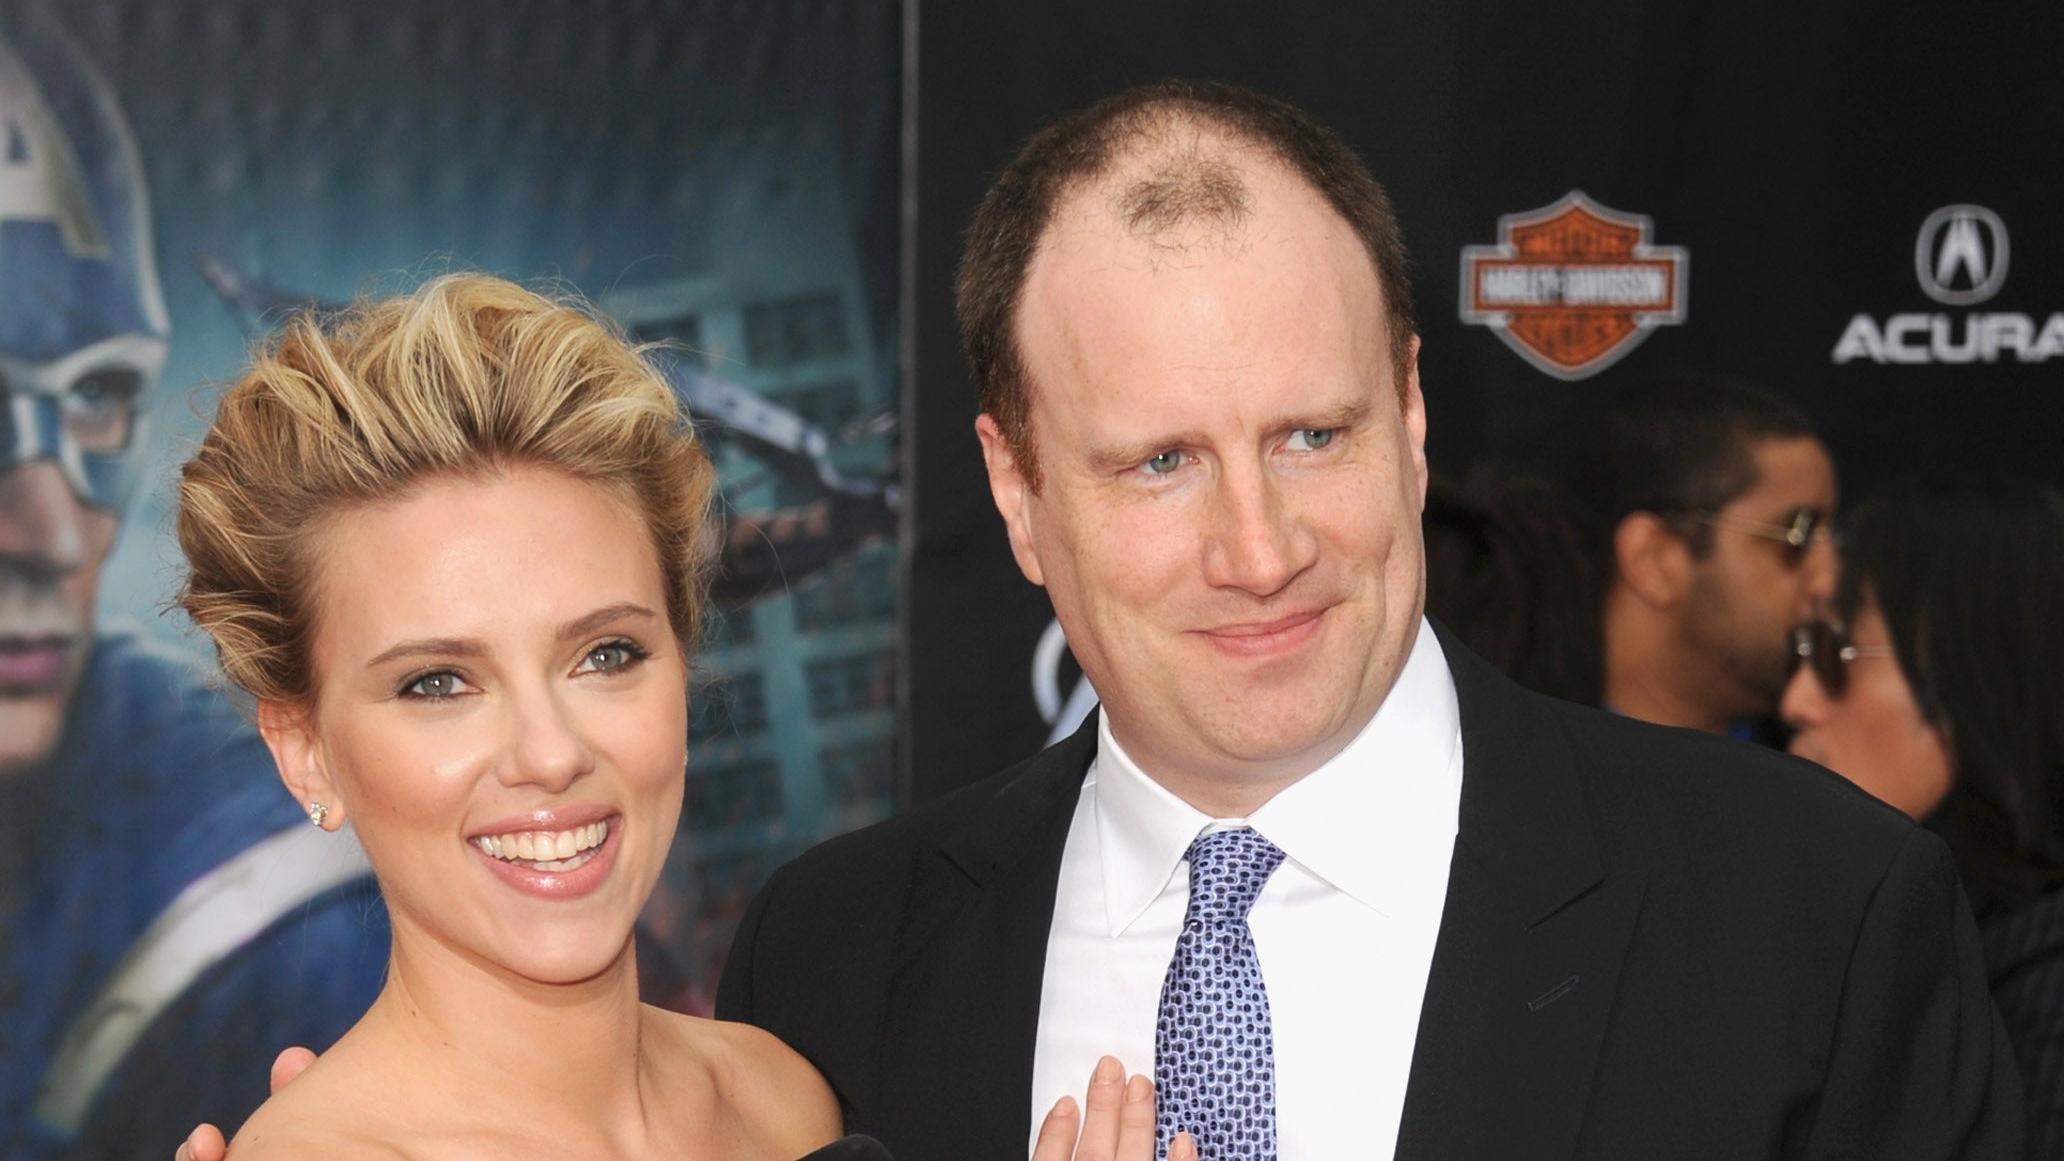 Kevin Feige reportedly “angry and embarrassed” about Disney’s handling of ScarJo